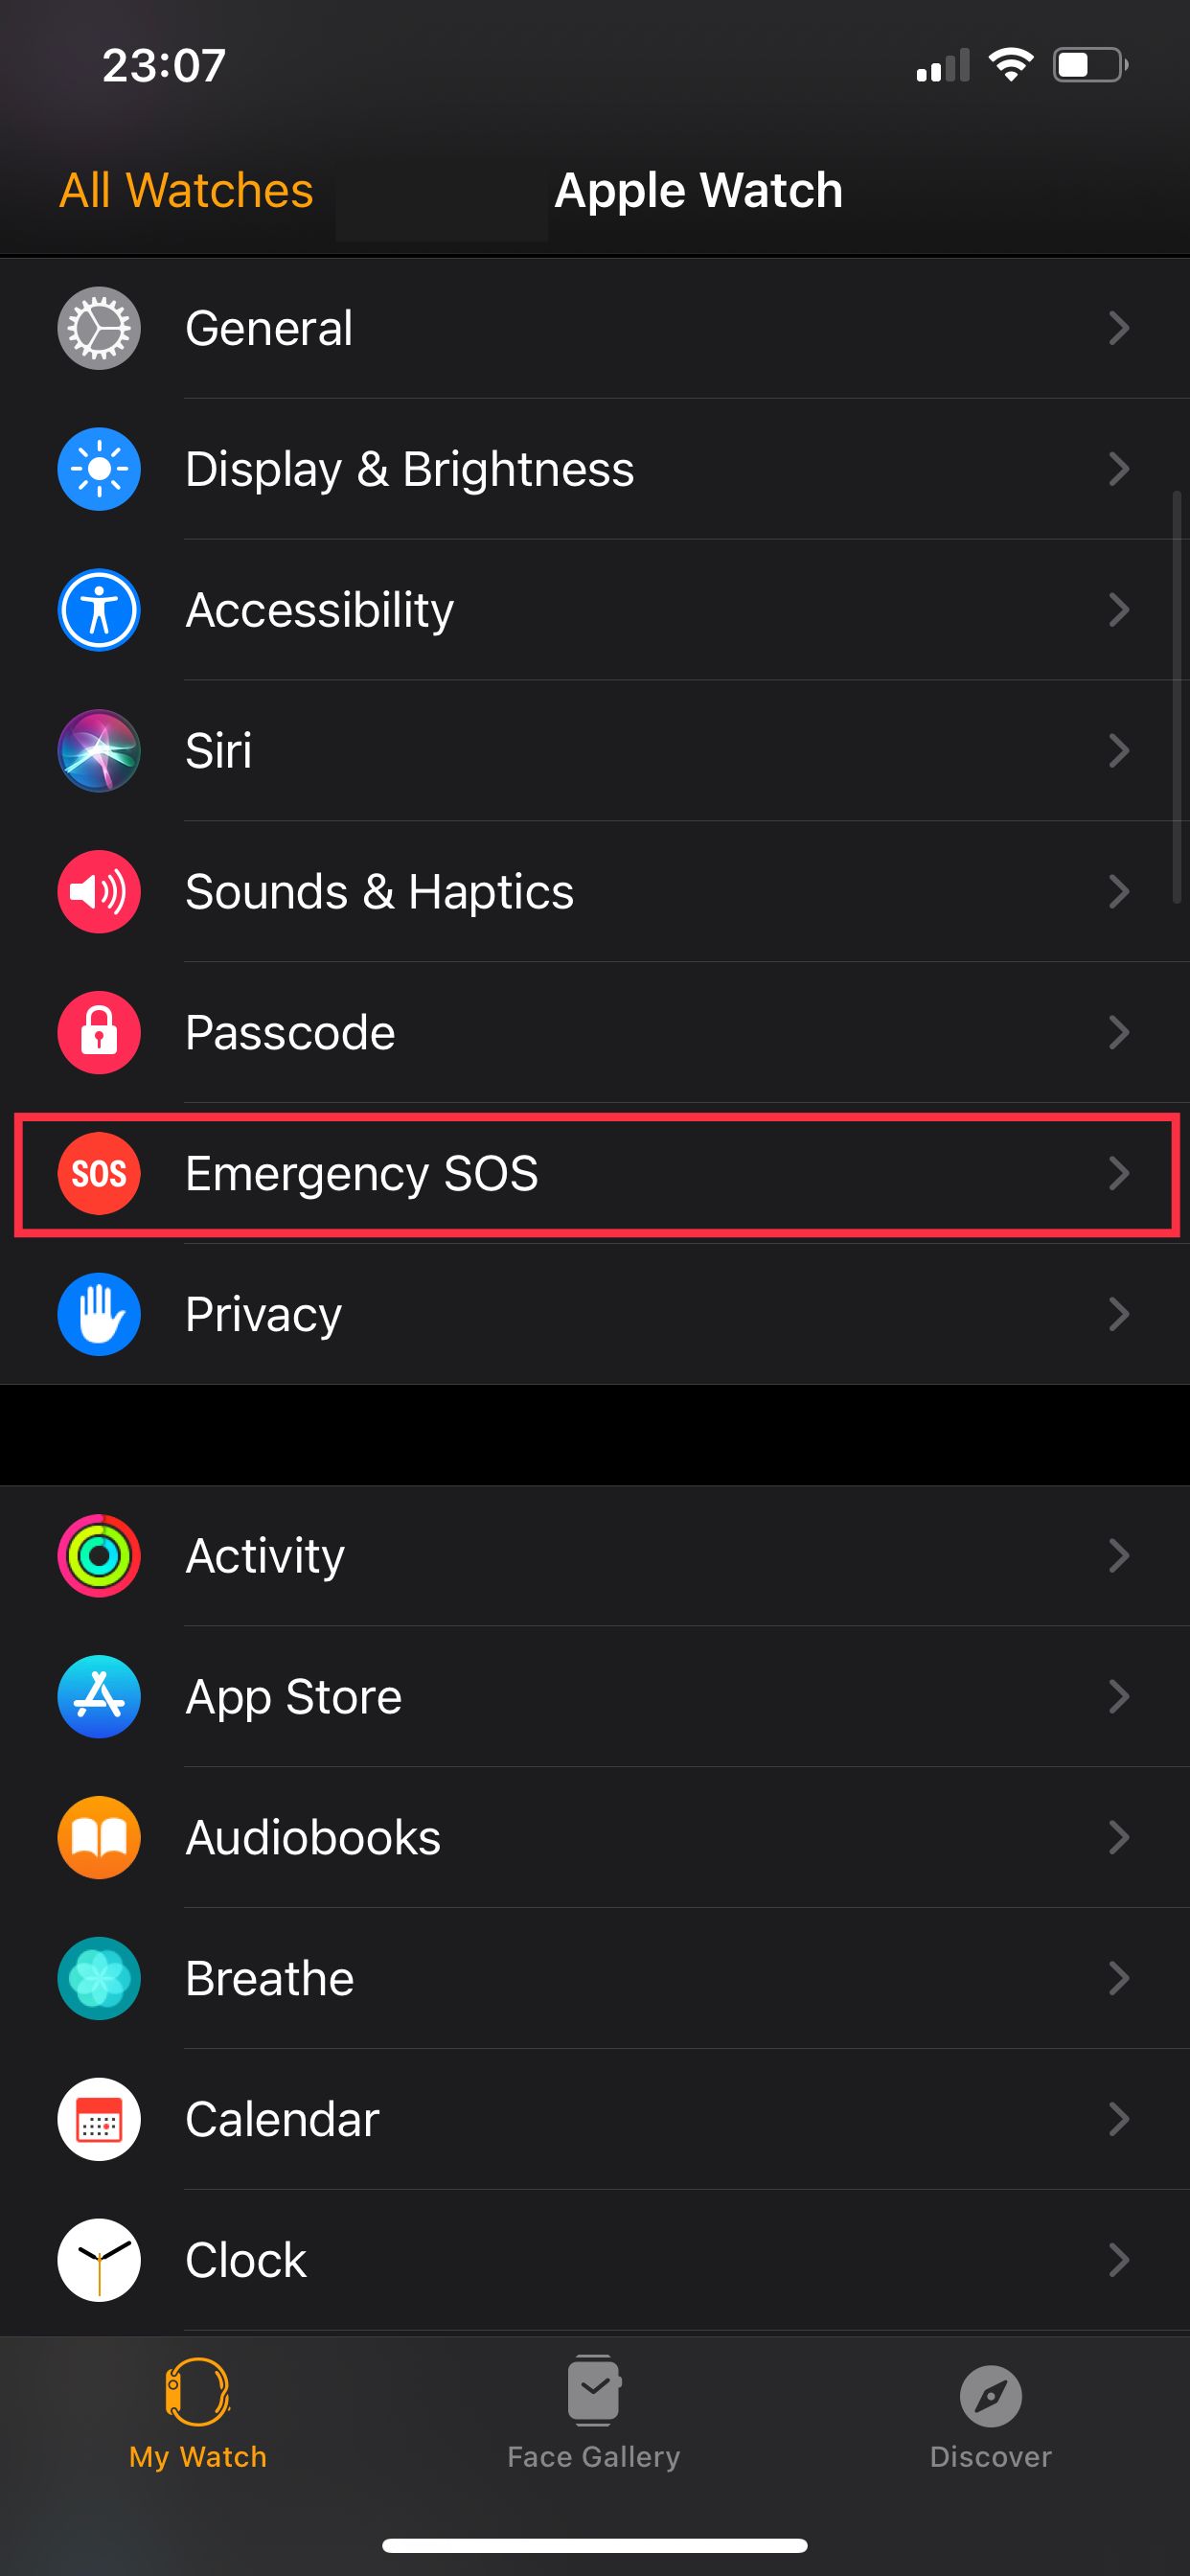 Tap Emergency SOS in the Watch app to enable Fall Detection.